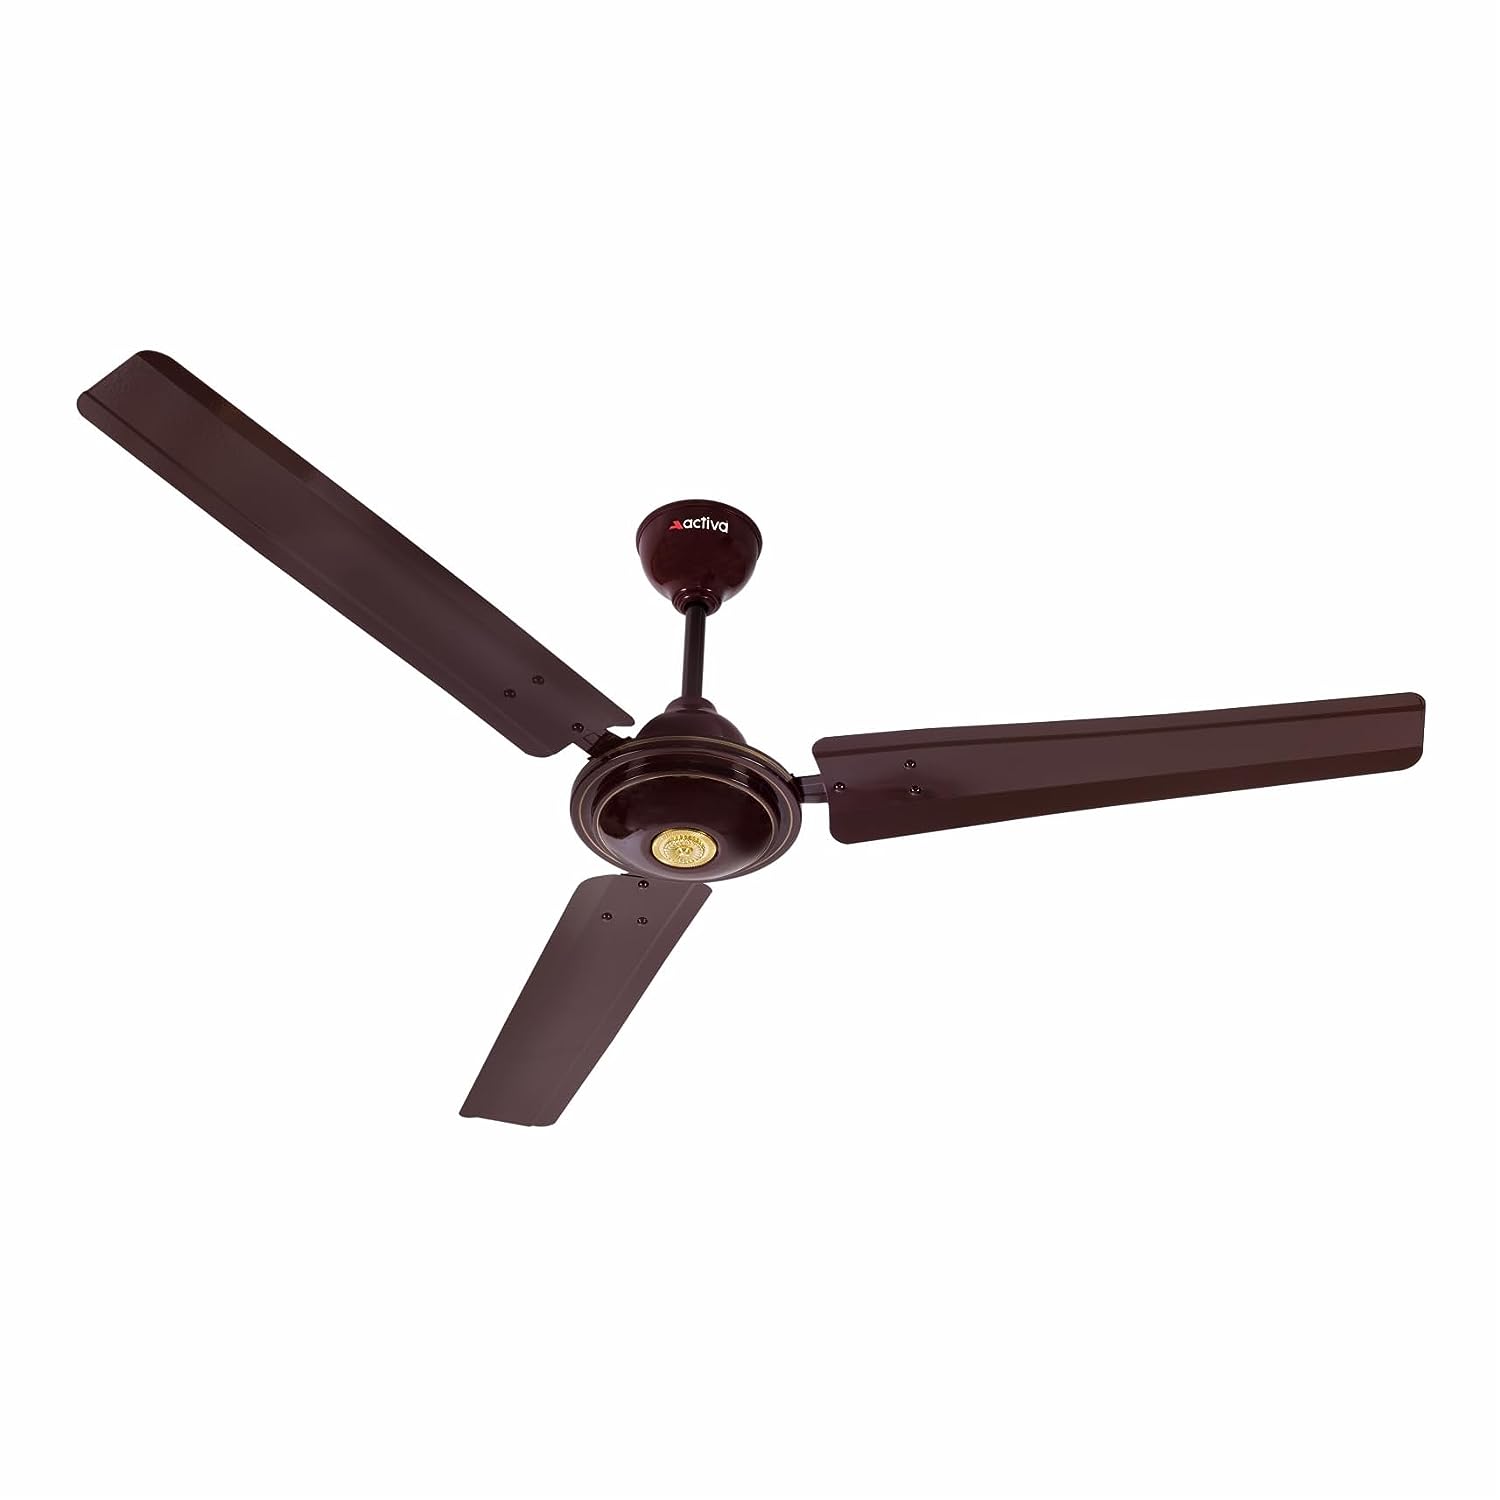 ACTIVA 390 RPM 1200mm High Speed BEE Approved Apsra Ceiling Fan Brown-2 Years Warranty